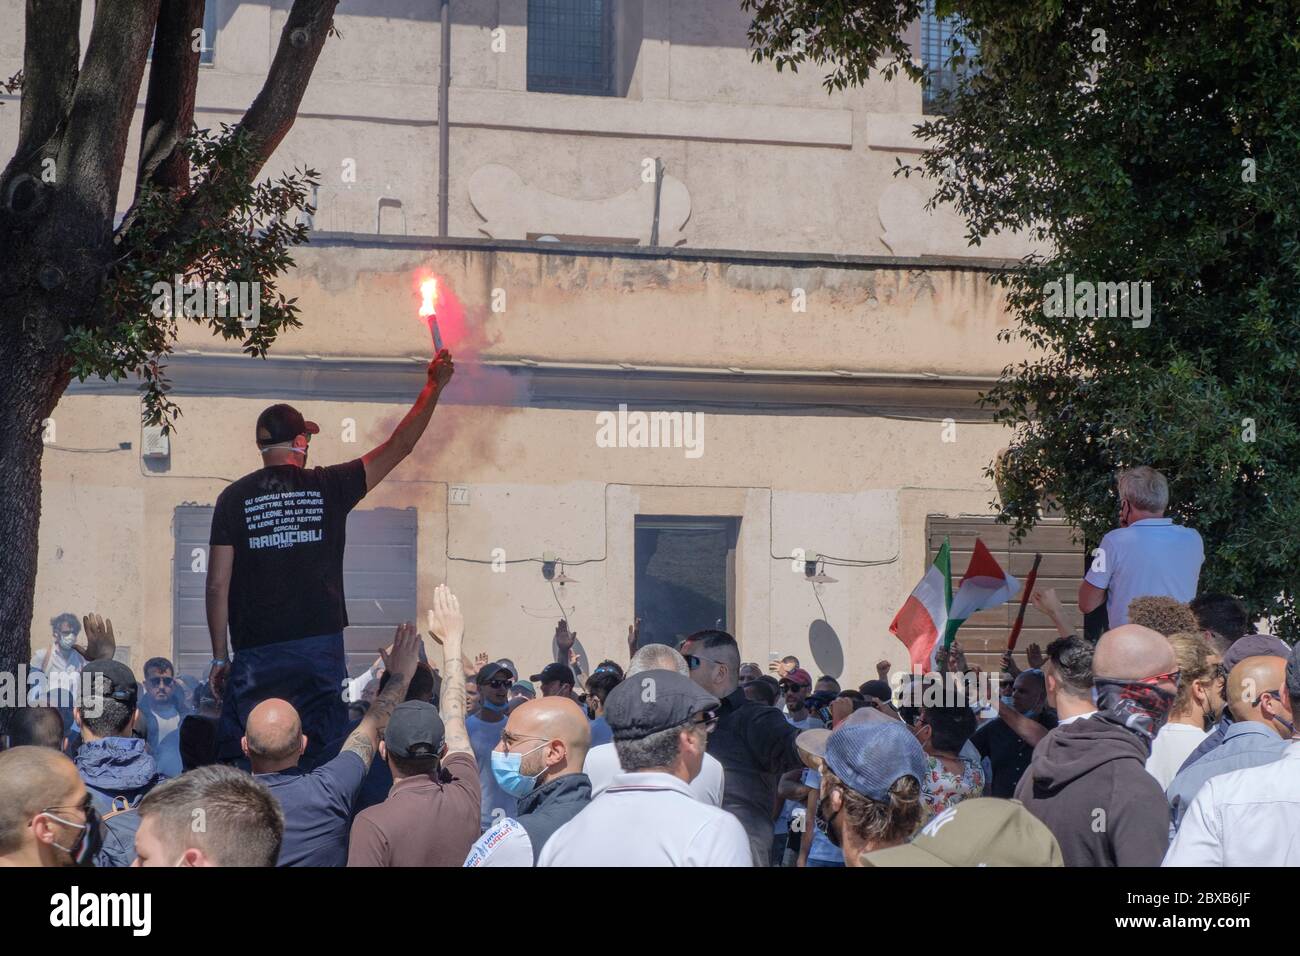 An extreme right-wing guy uses a smoke bomb at the populist demonstration of 'Ragazzi d'Italia' near Circo Massimo, Rome, Italy, June 6th, 2020 Stock Photo